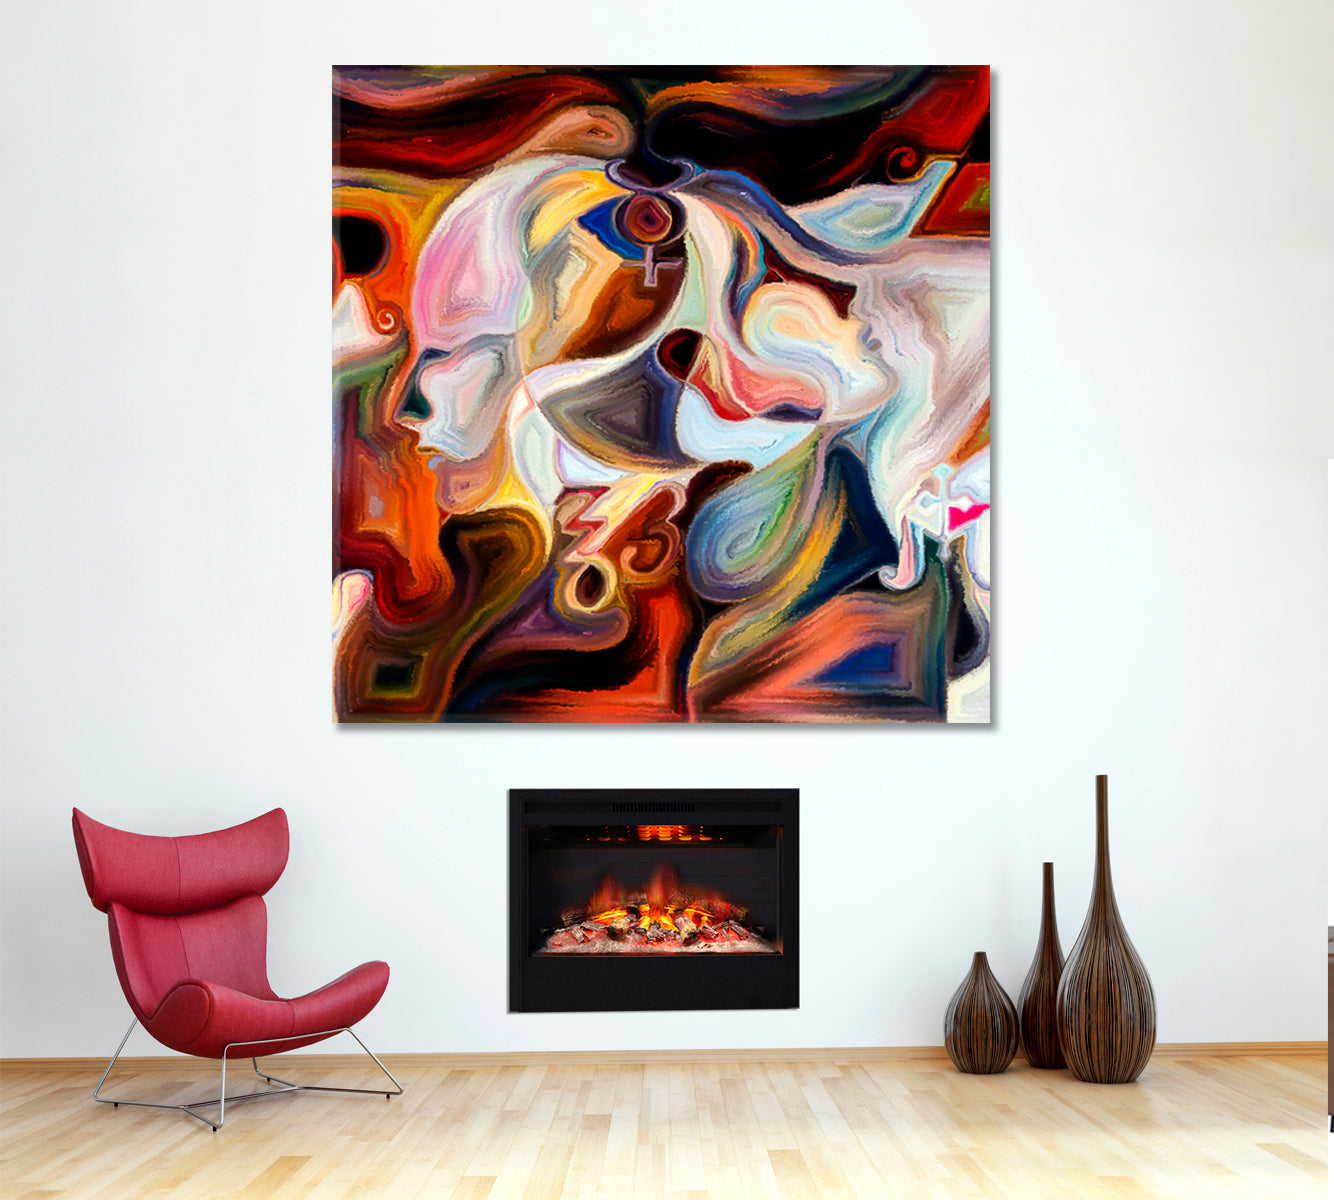 Inner Colors. Human Profile And Colorful Vivid Paint Shapes Abstract Design - Square Panel Abstract Art Print Artesty   